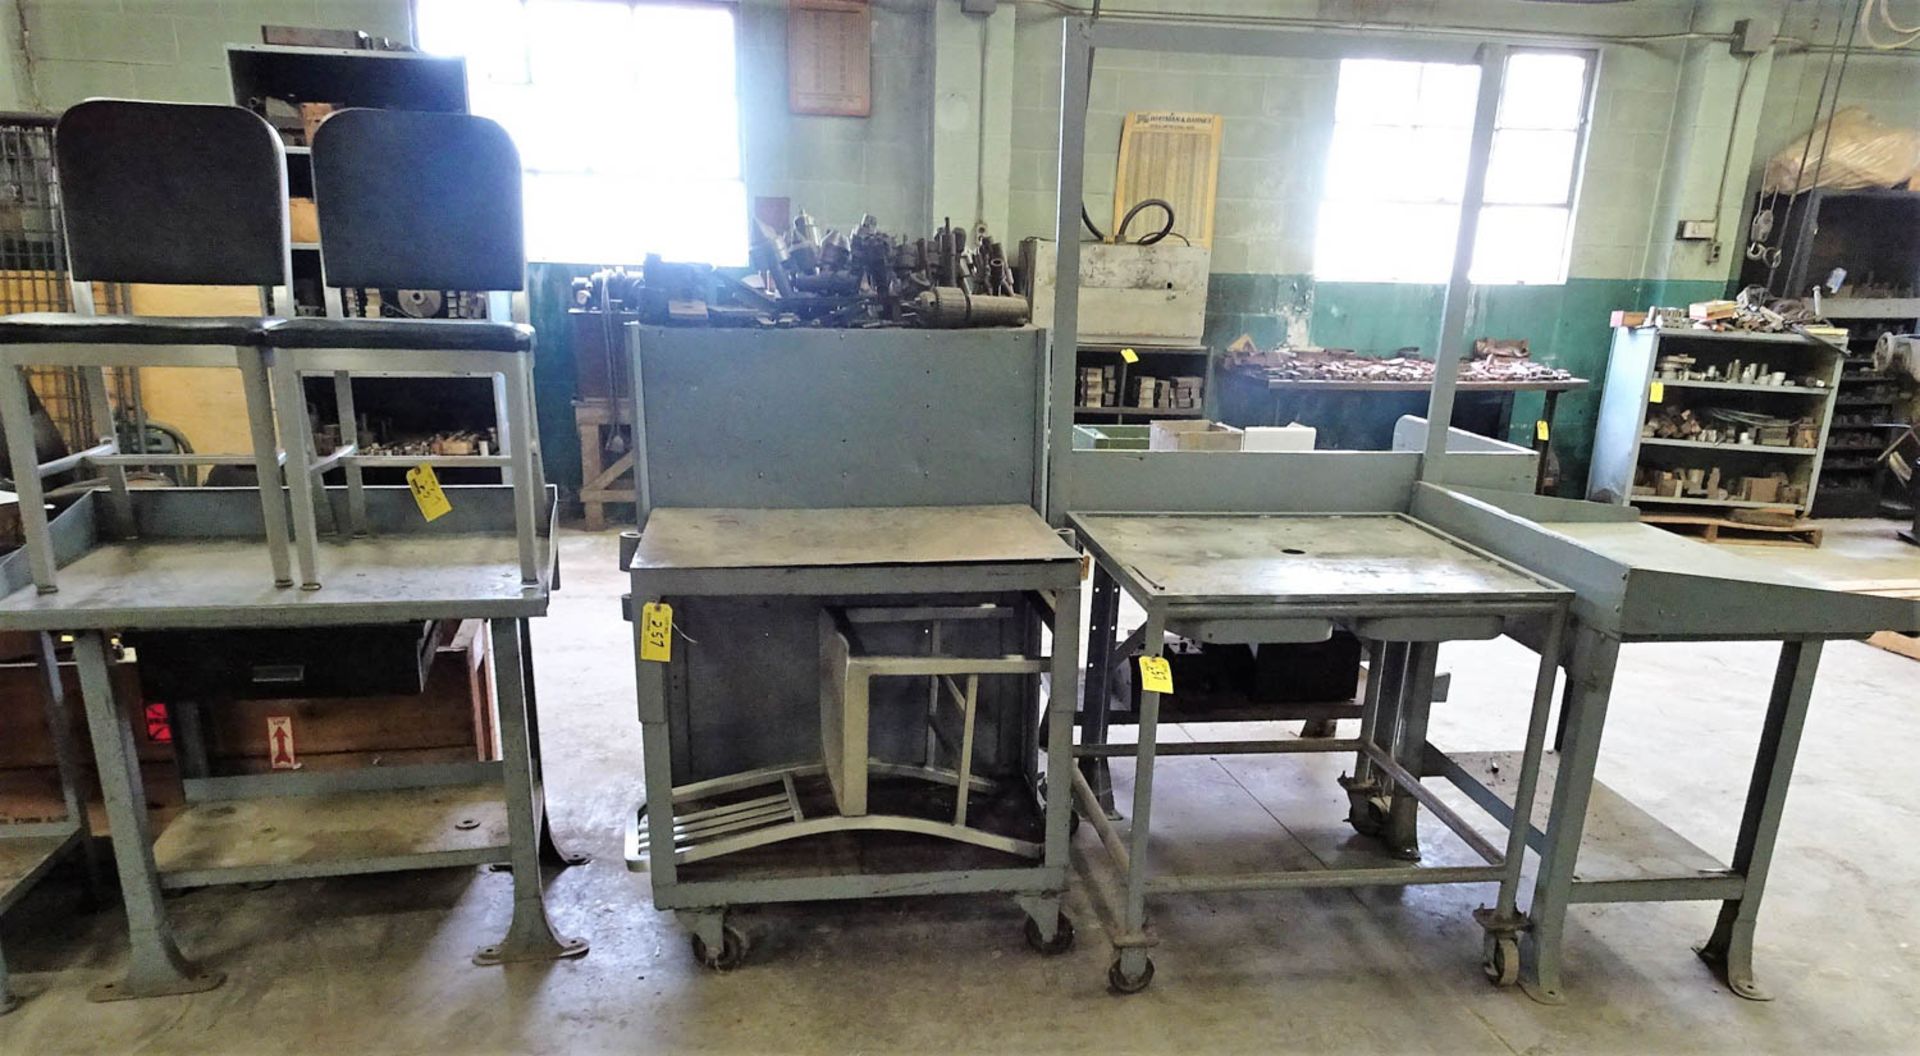 (2) CASTERED CARTS, (2) 36" X 24" WORK BENCHES, (3) ALUMINUM FRAMED CHAIRS